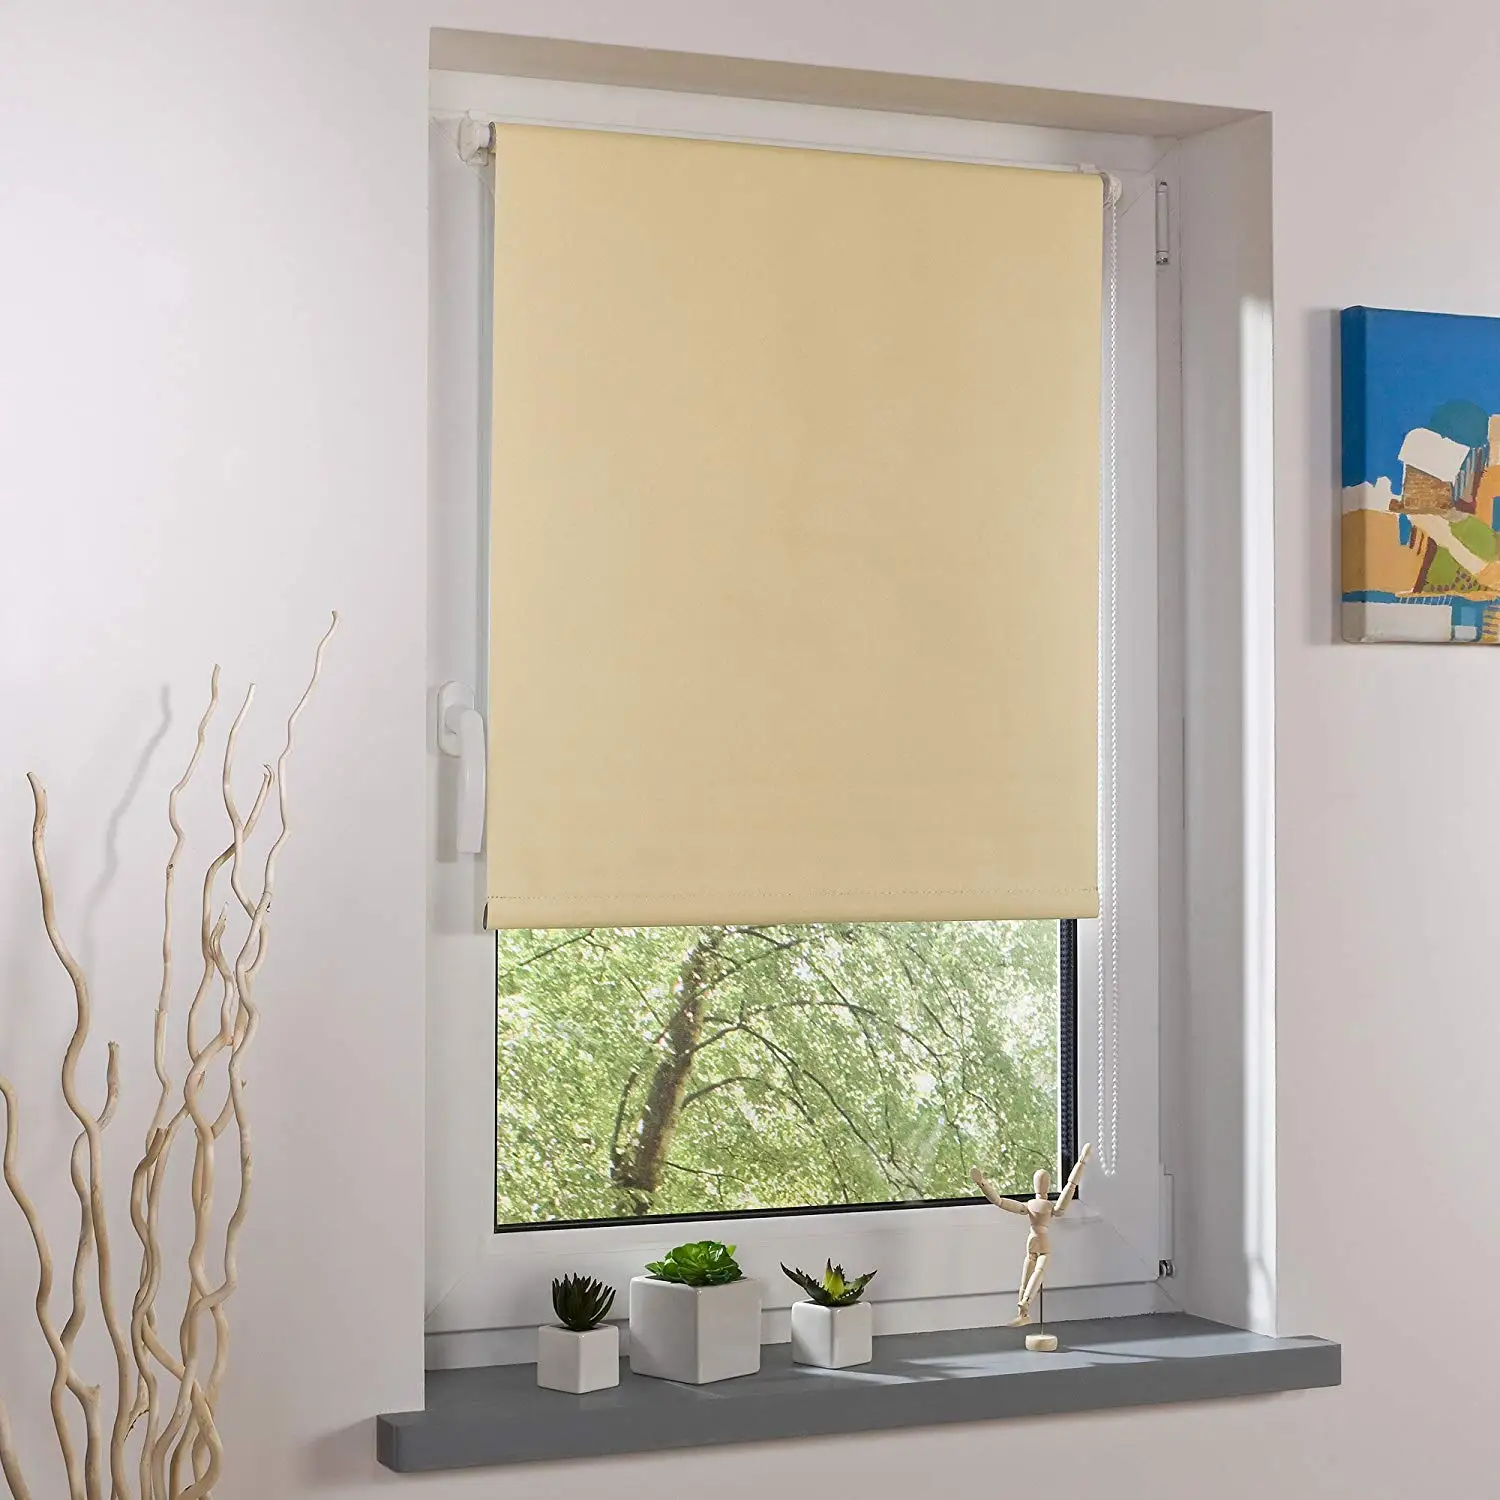 Mini-Blind Klemmfix Clamp Roller Blind Easyfix Privacy-Height 200 CM PALE YELLOW 